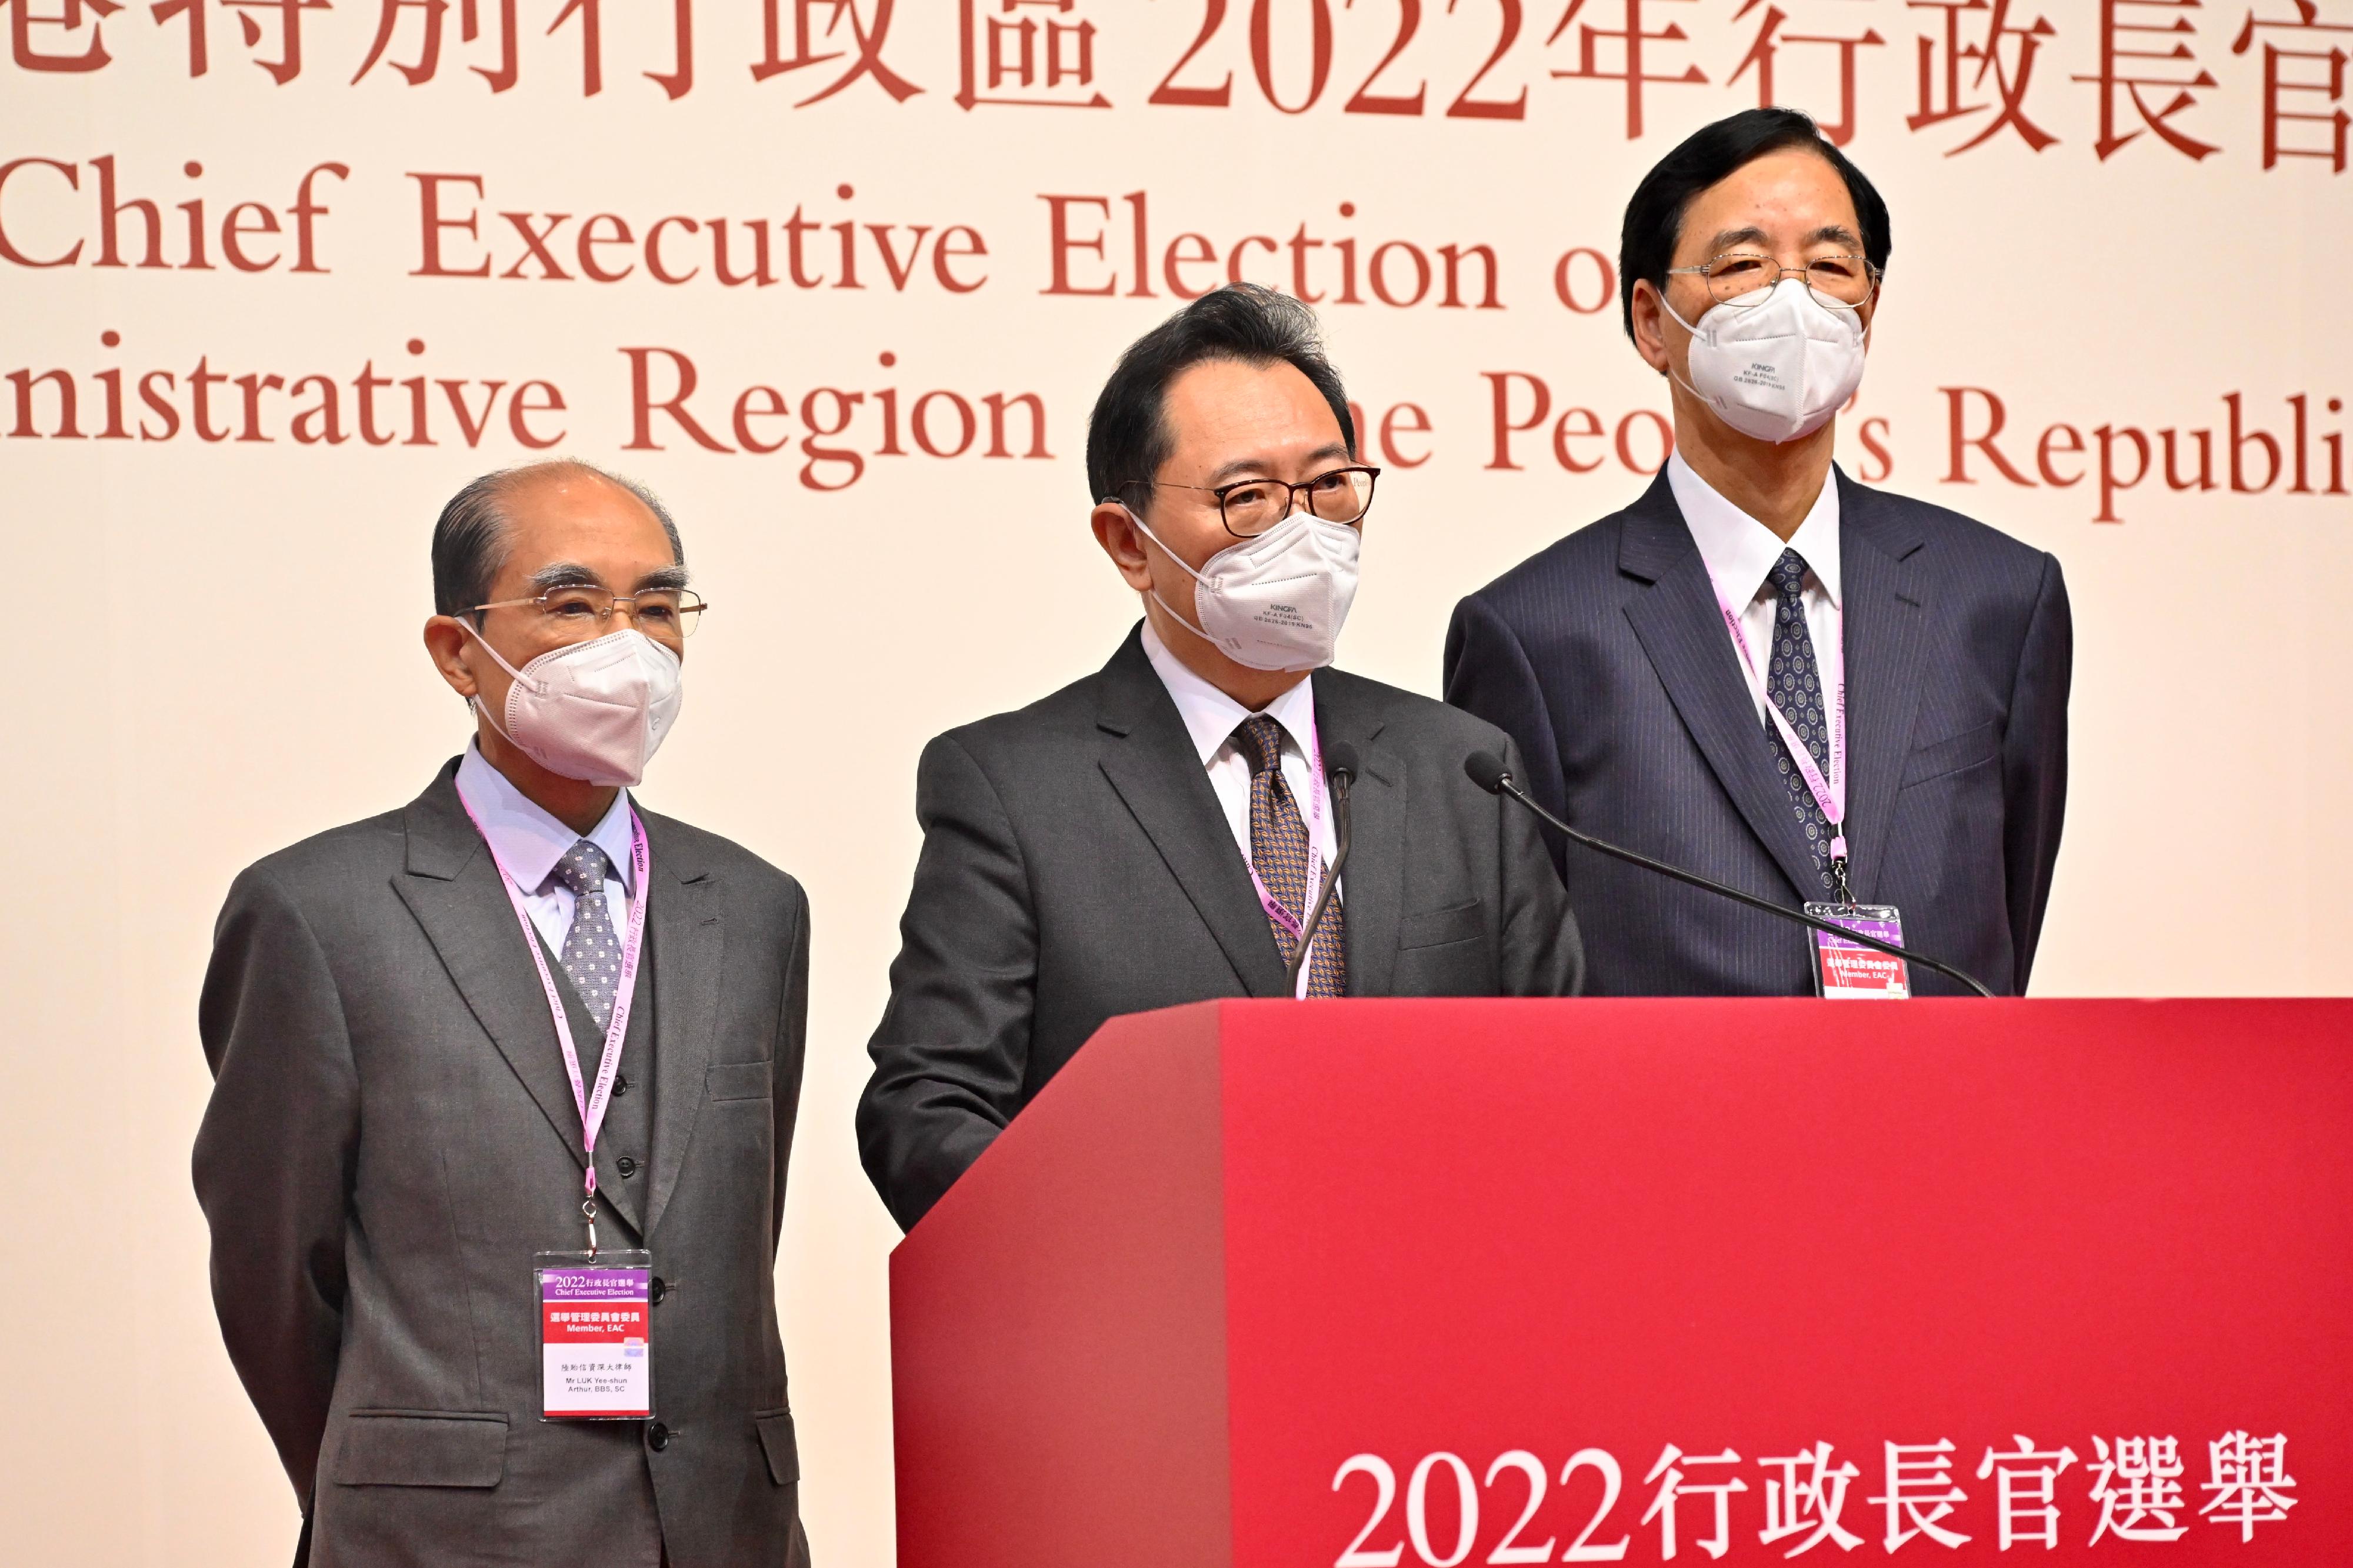 The Chairman of the Electoral Affairs Commission (EAC), Mr Justice Barnabas Fung Wah (centre); EAC members Mr Arthur Luk, SC (left), and Professor Daniel Shek (right) meet the media to conclude the election this afternoon (May 8) at the central counting station cum media centre of the 2022 Chief Executive Election at the Hong Kong Convention and Exhibition Centre in Wan Chai.